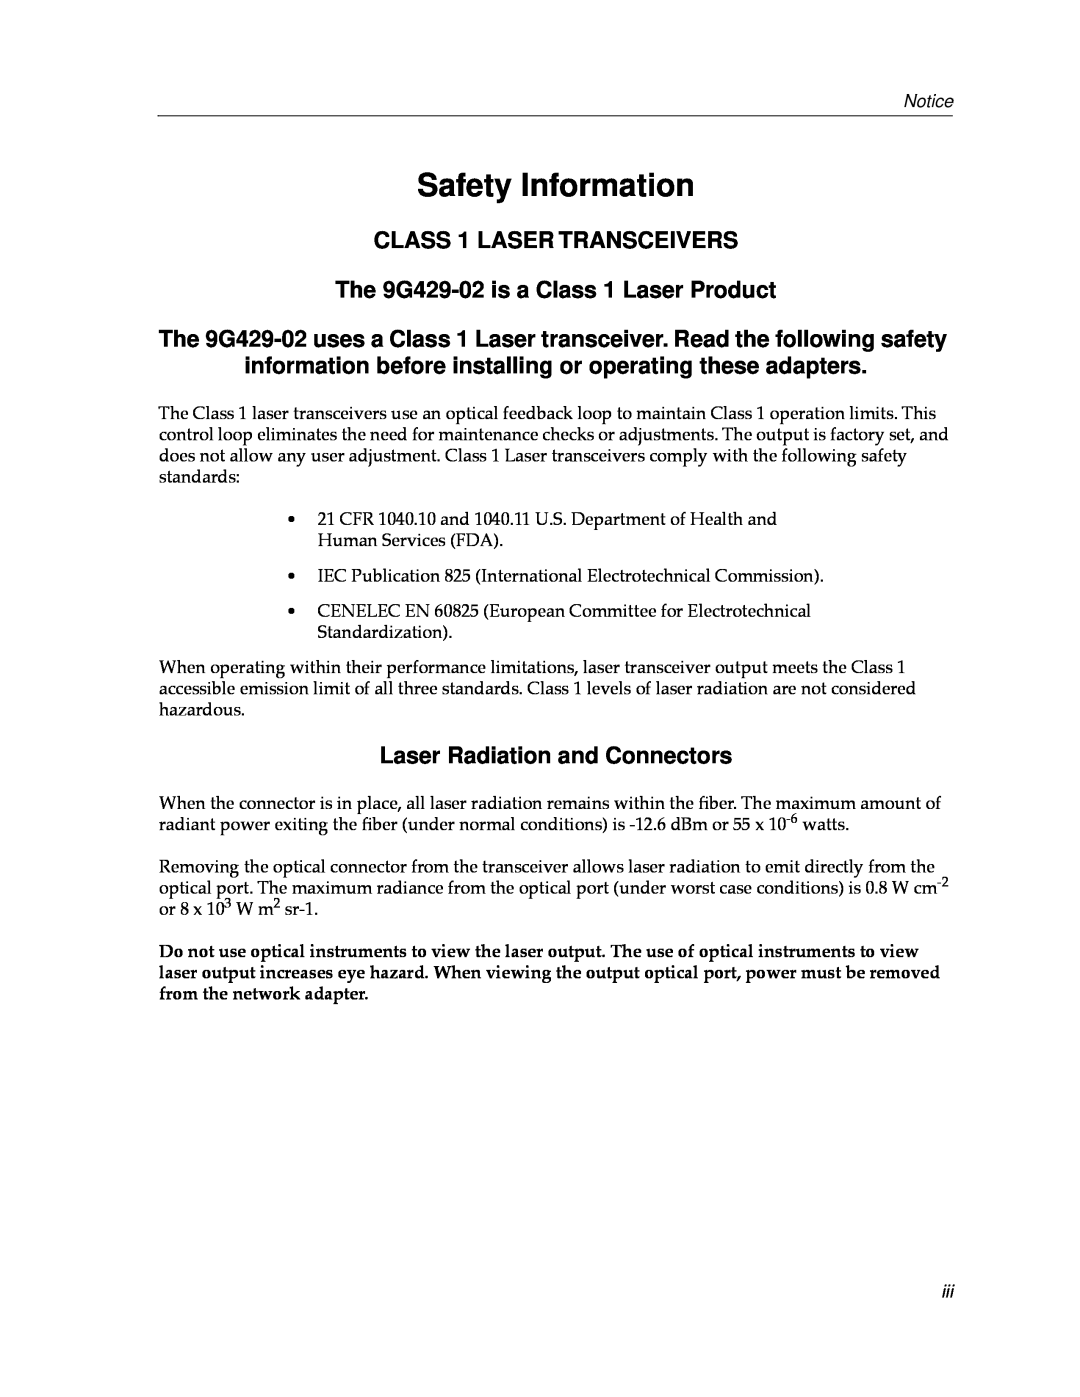 Cabletron Systems 9000 manual Safety Information, CLASS 1 LASER TRANSCEIVERS The 9G429-02 is a Class 1 Laser Product 